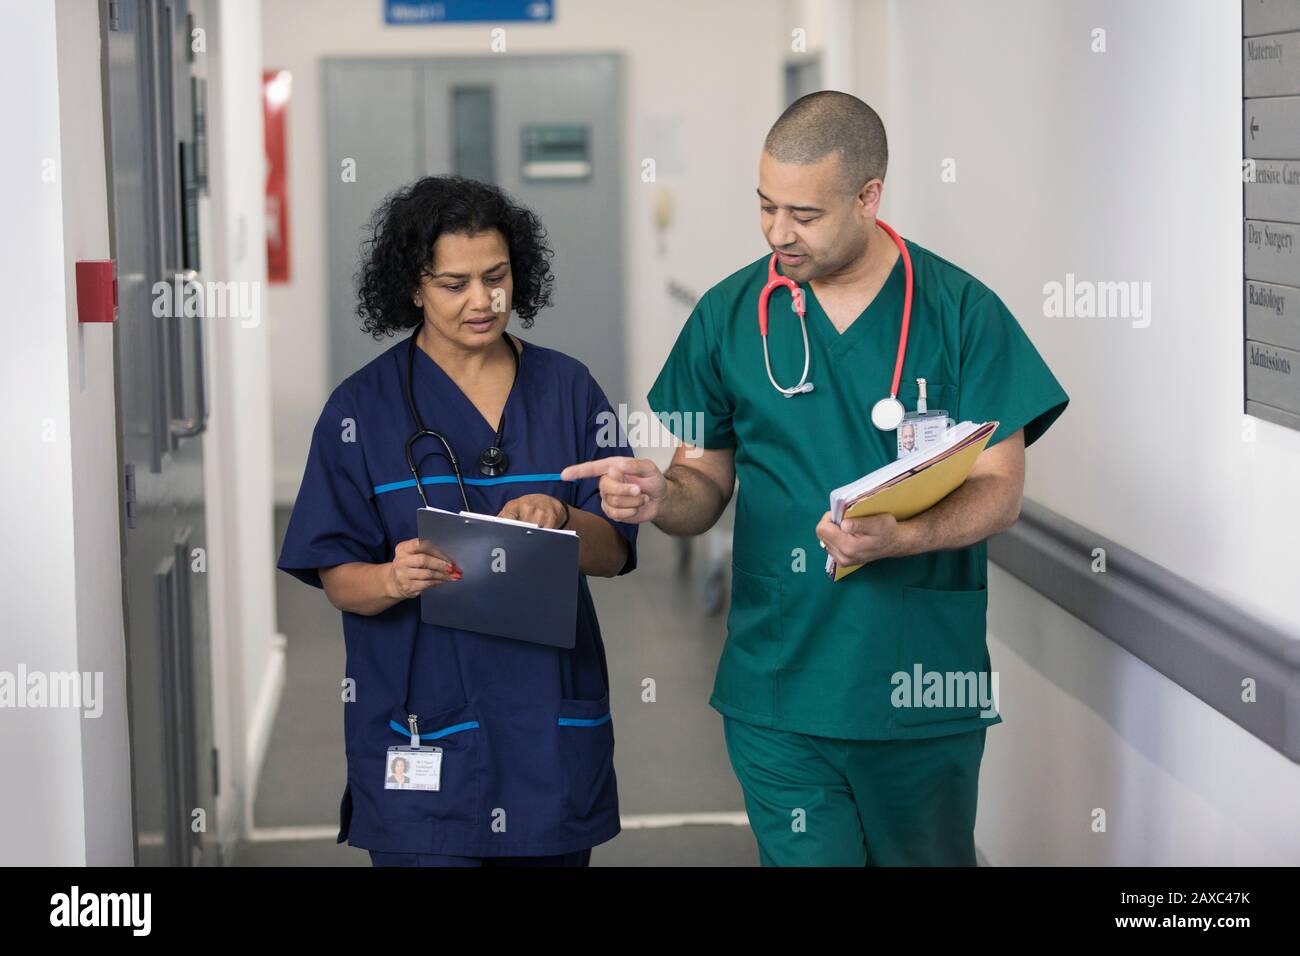 Doctor and surgeon discussing medical chart, making rounds in hospital corridor Stock Photo